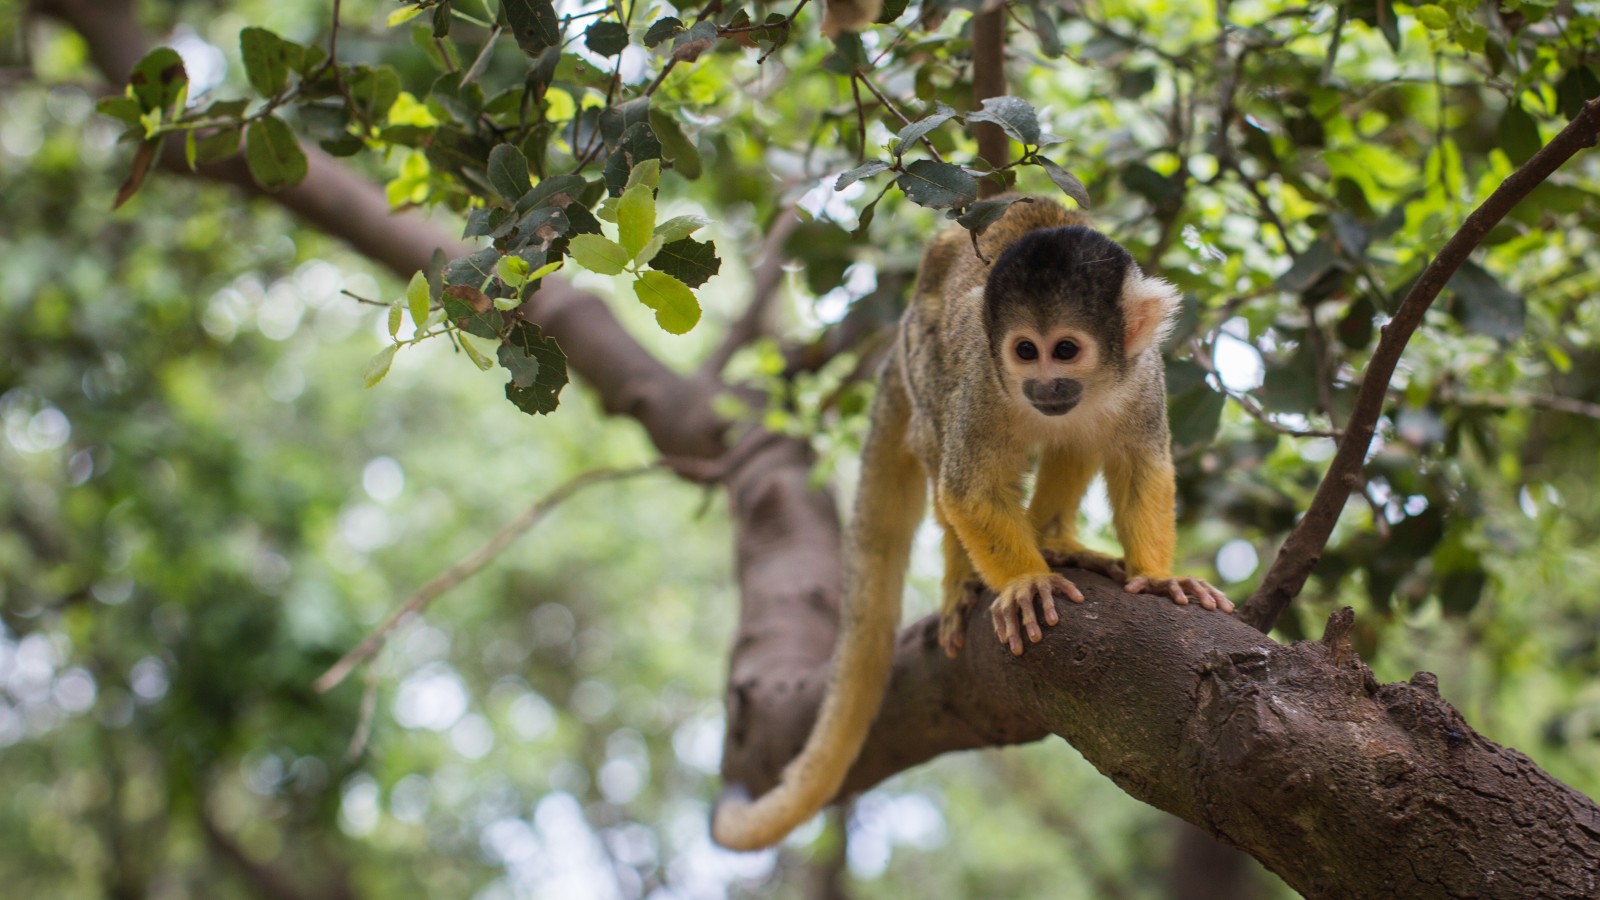 Monkeys shown to have conscious minds like humans - ISRAEL21c